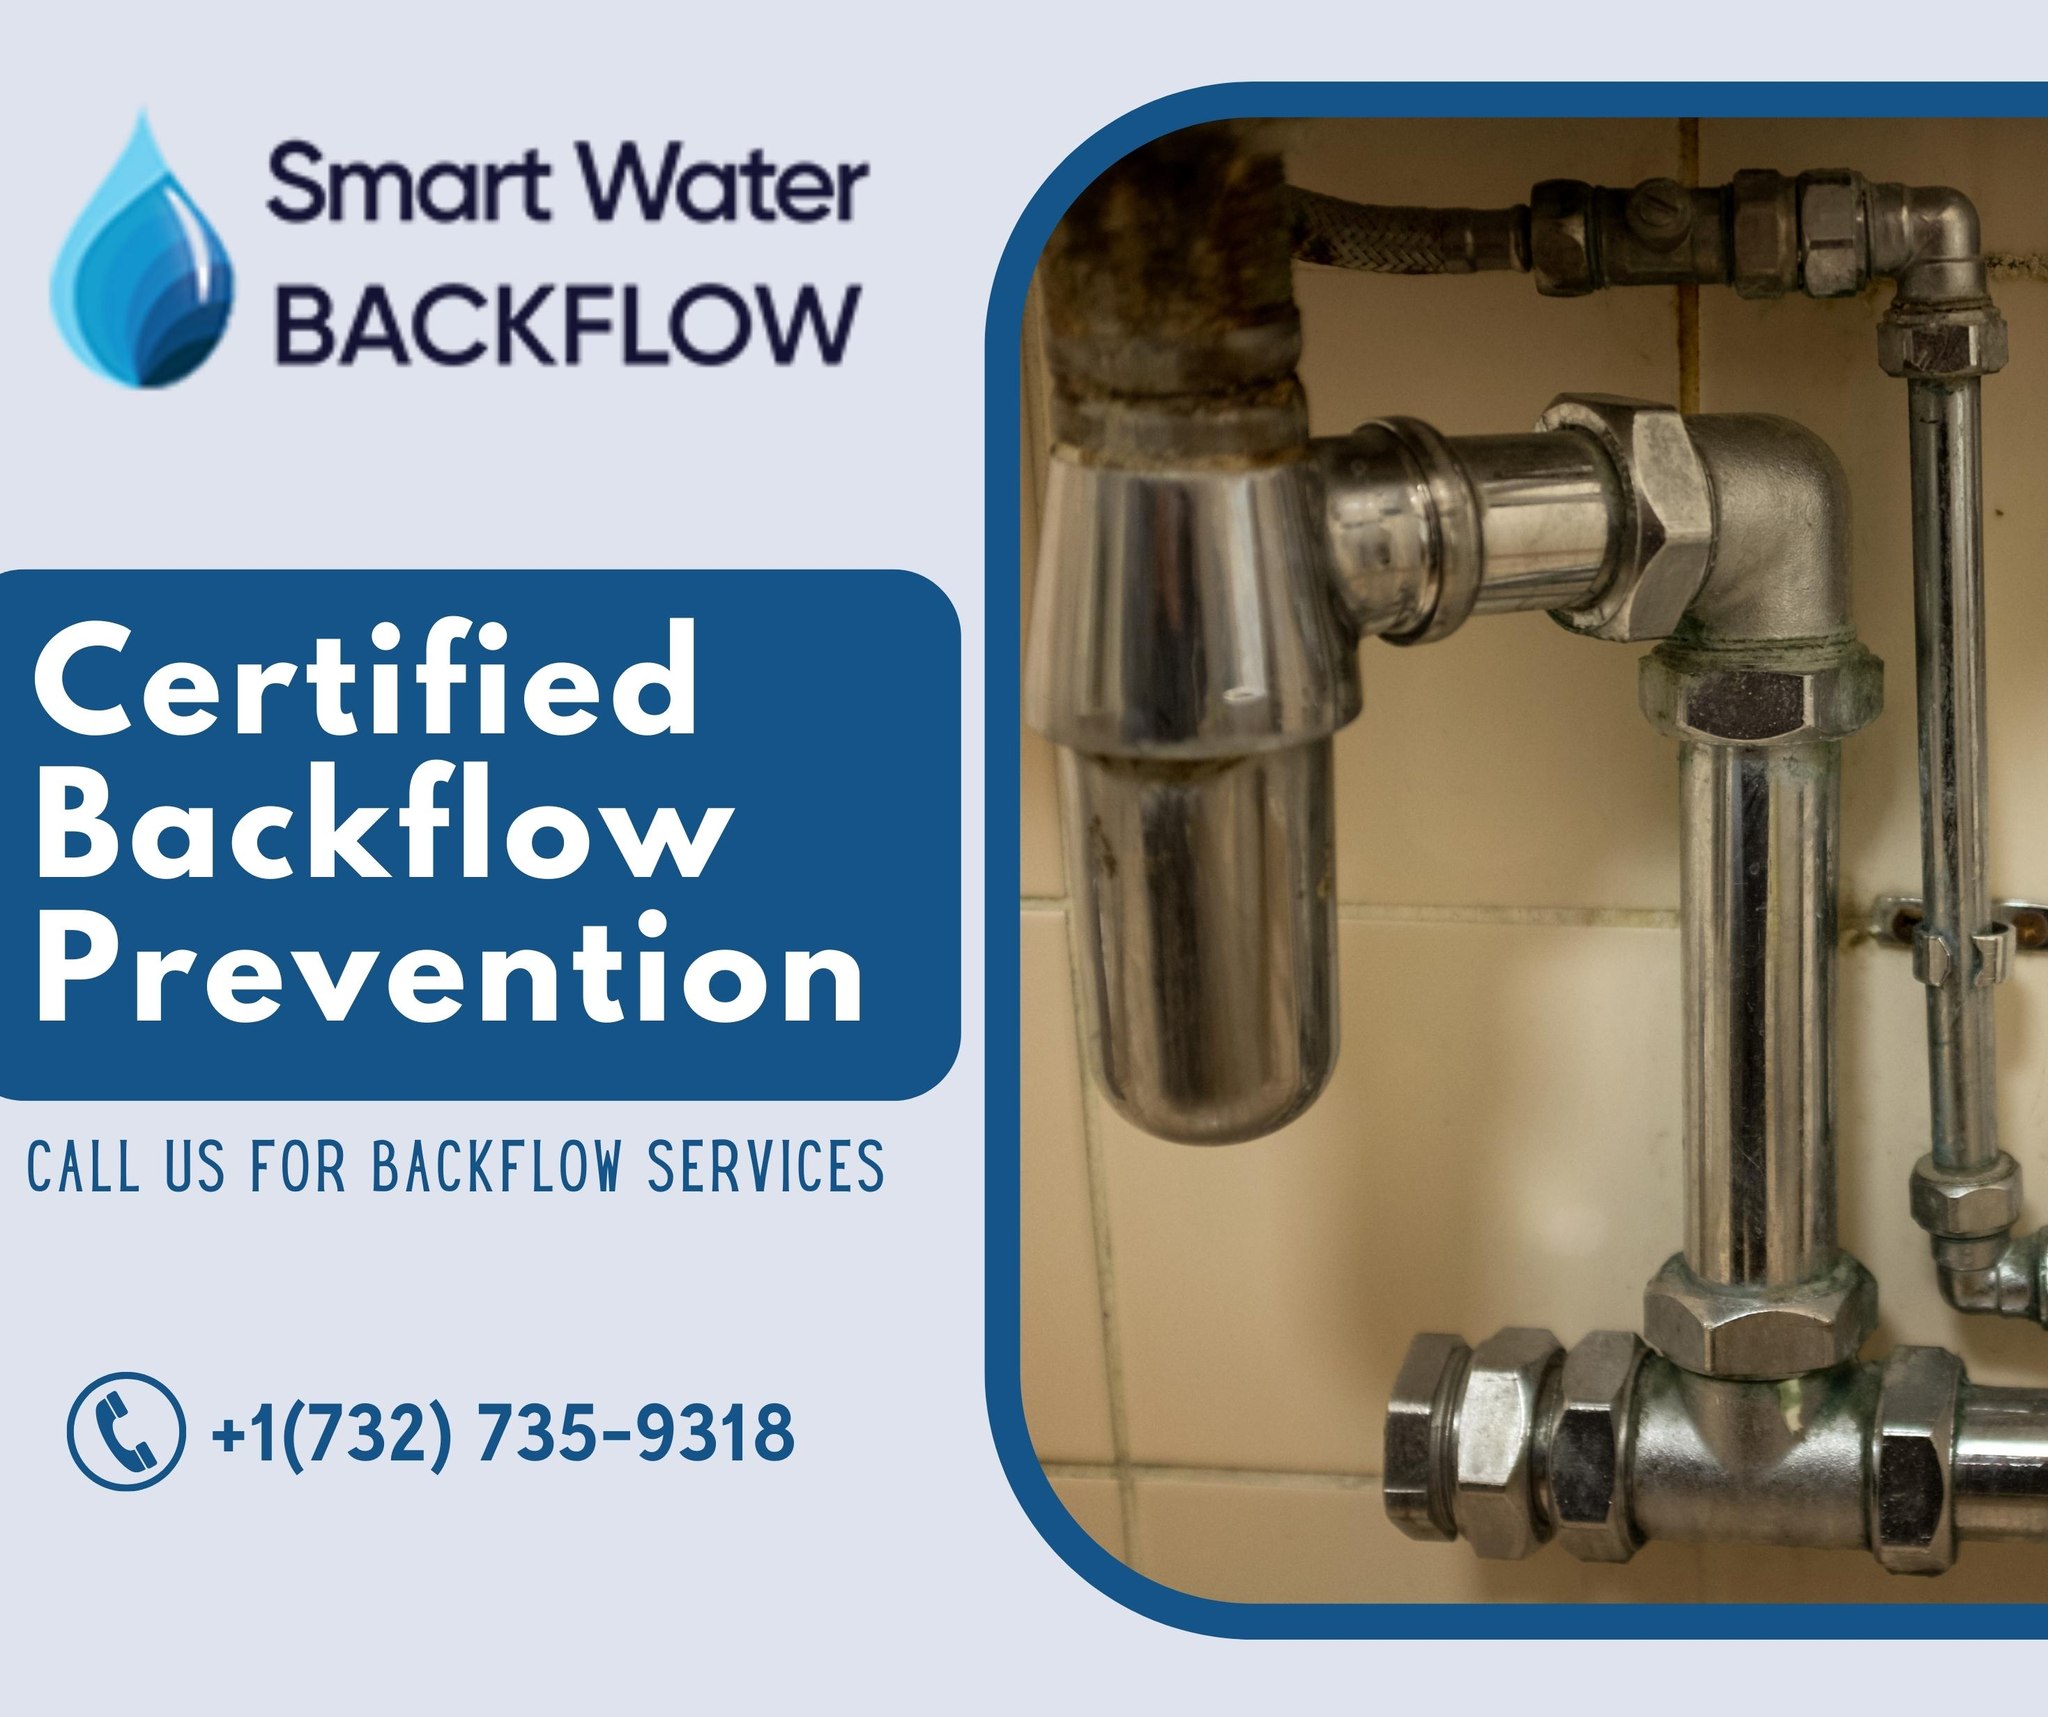 Certified Backflow Testing services